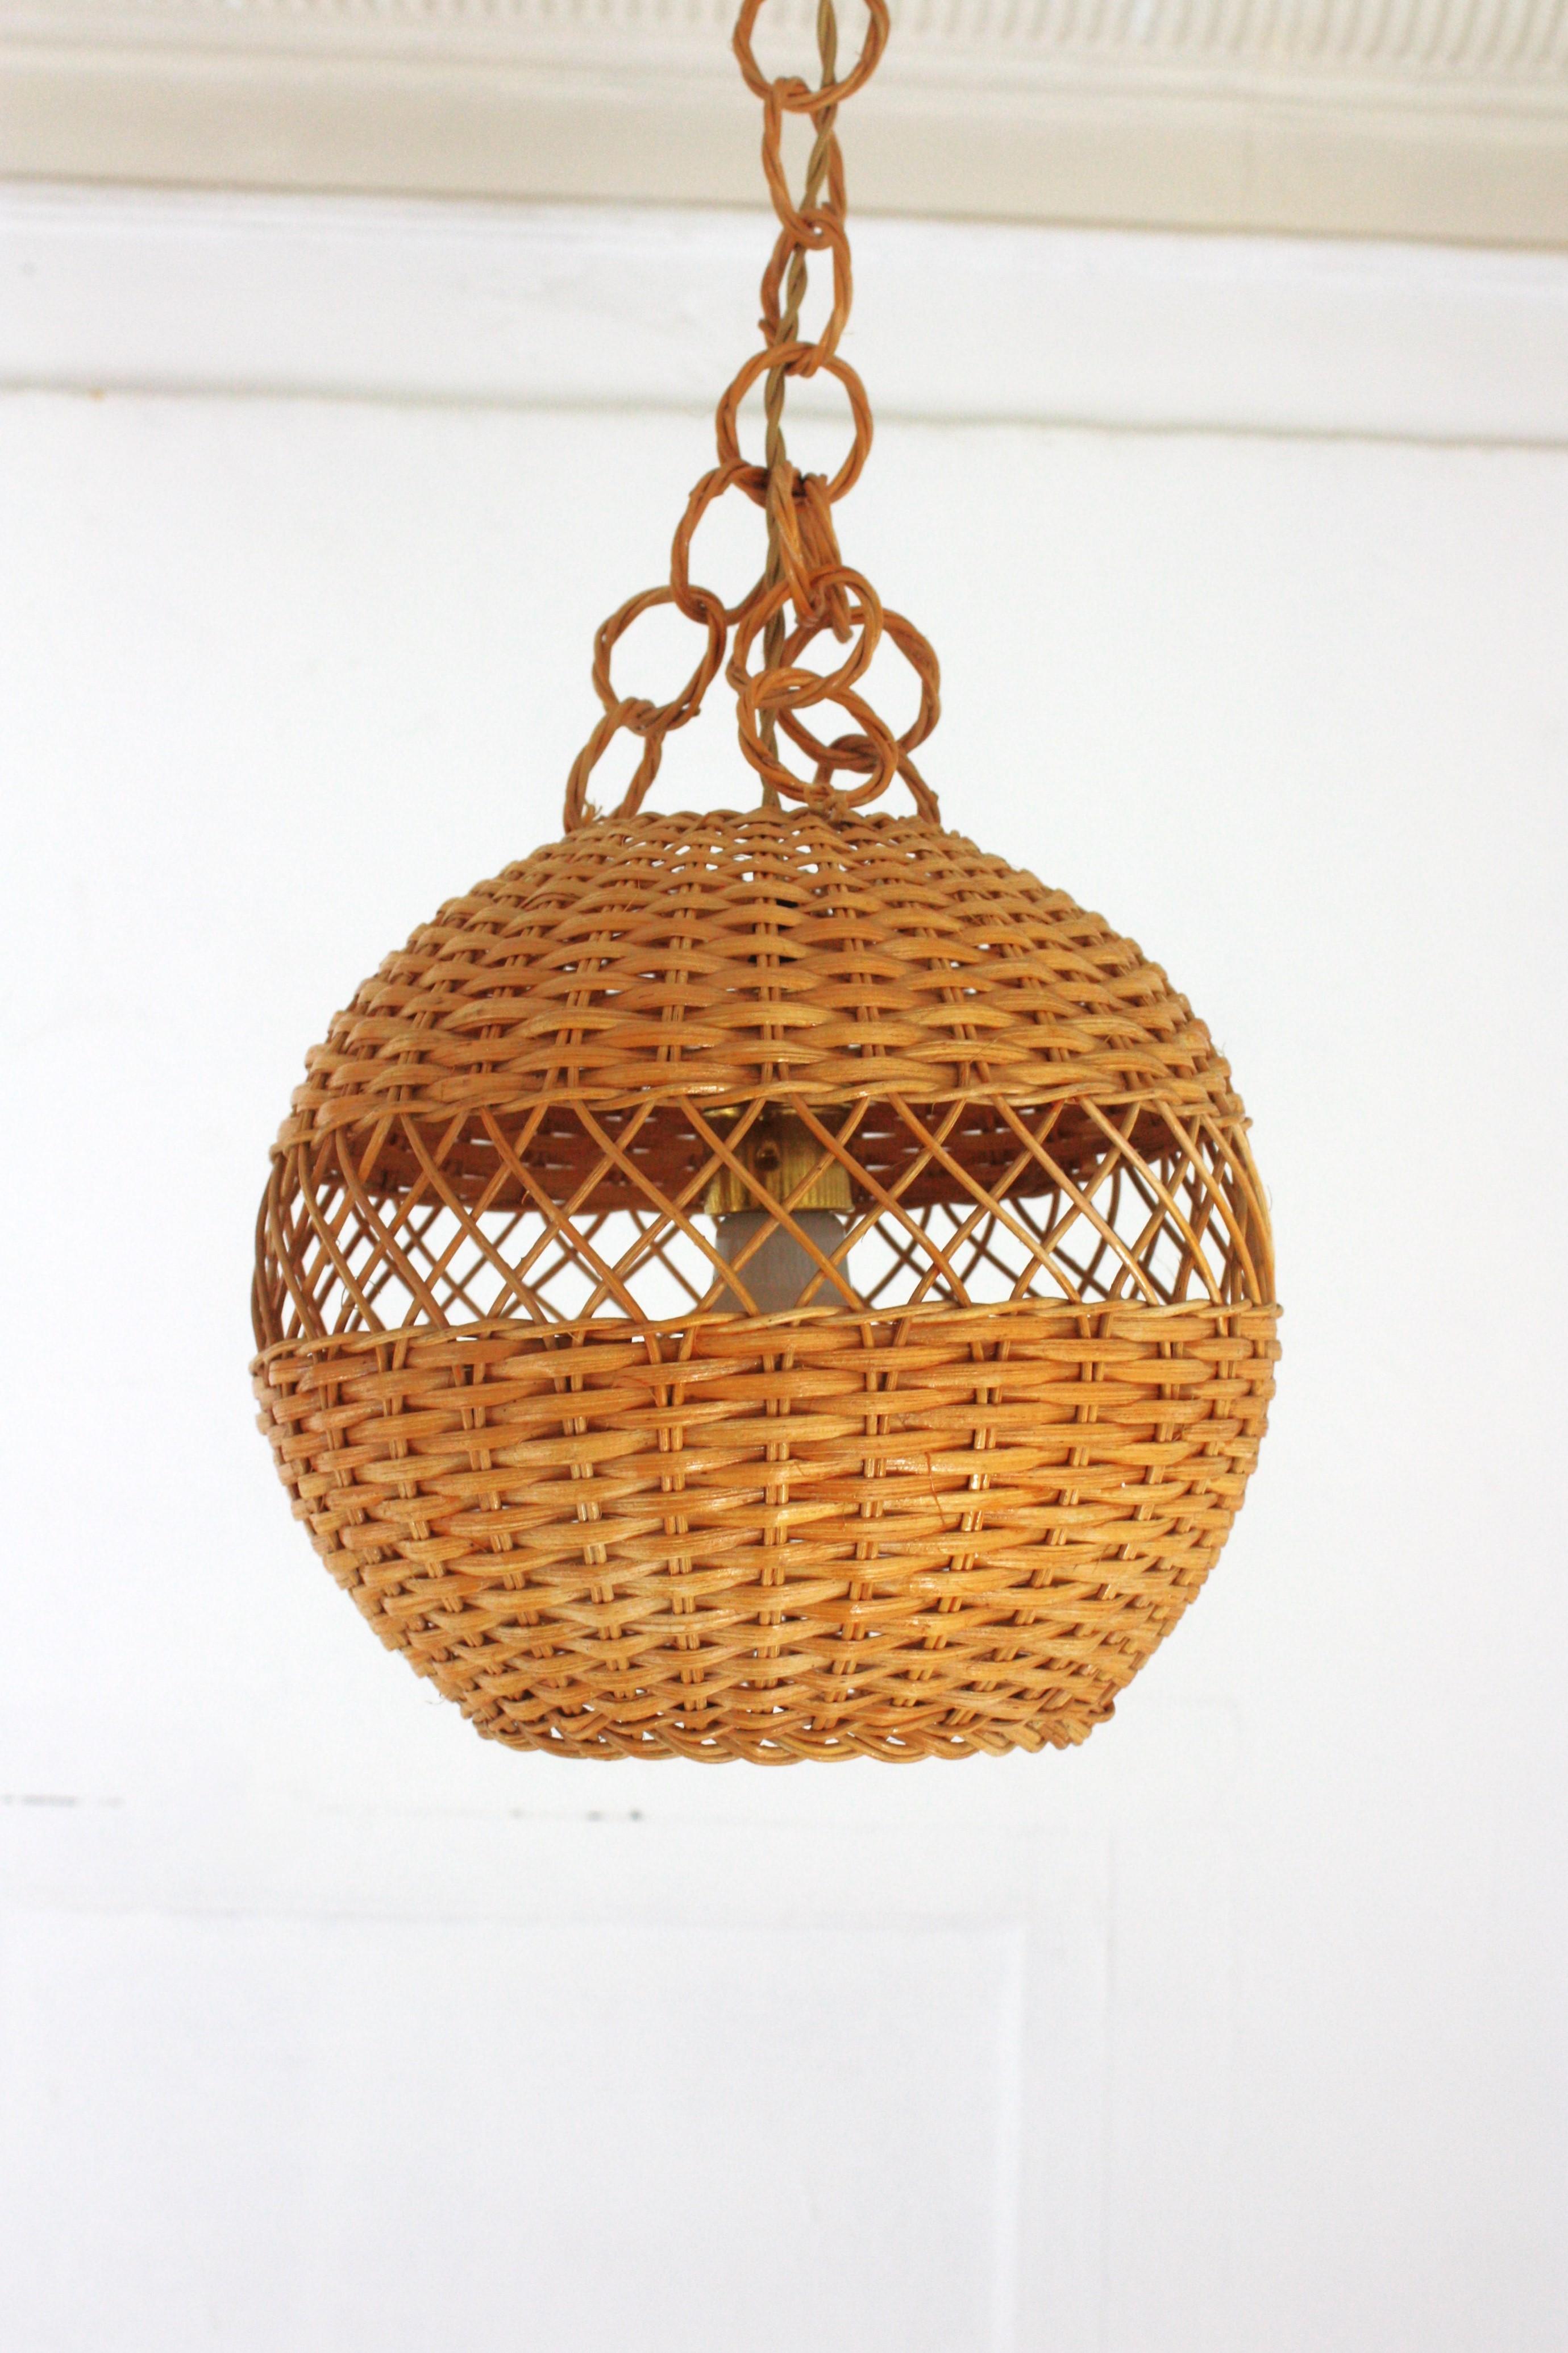 Pair of Handwoven Wicker Globe Pendant Lights or Lanterns For Sale 3